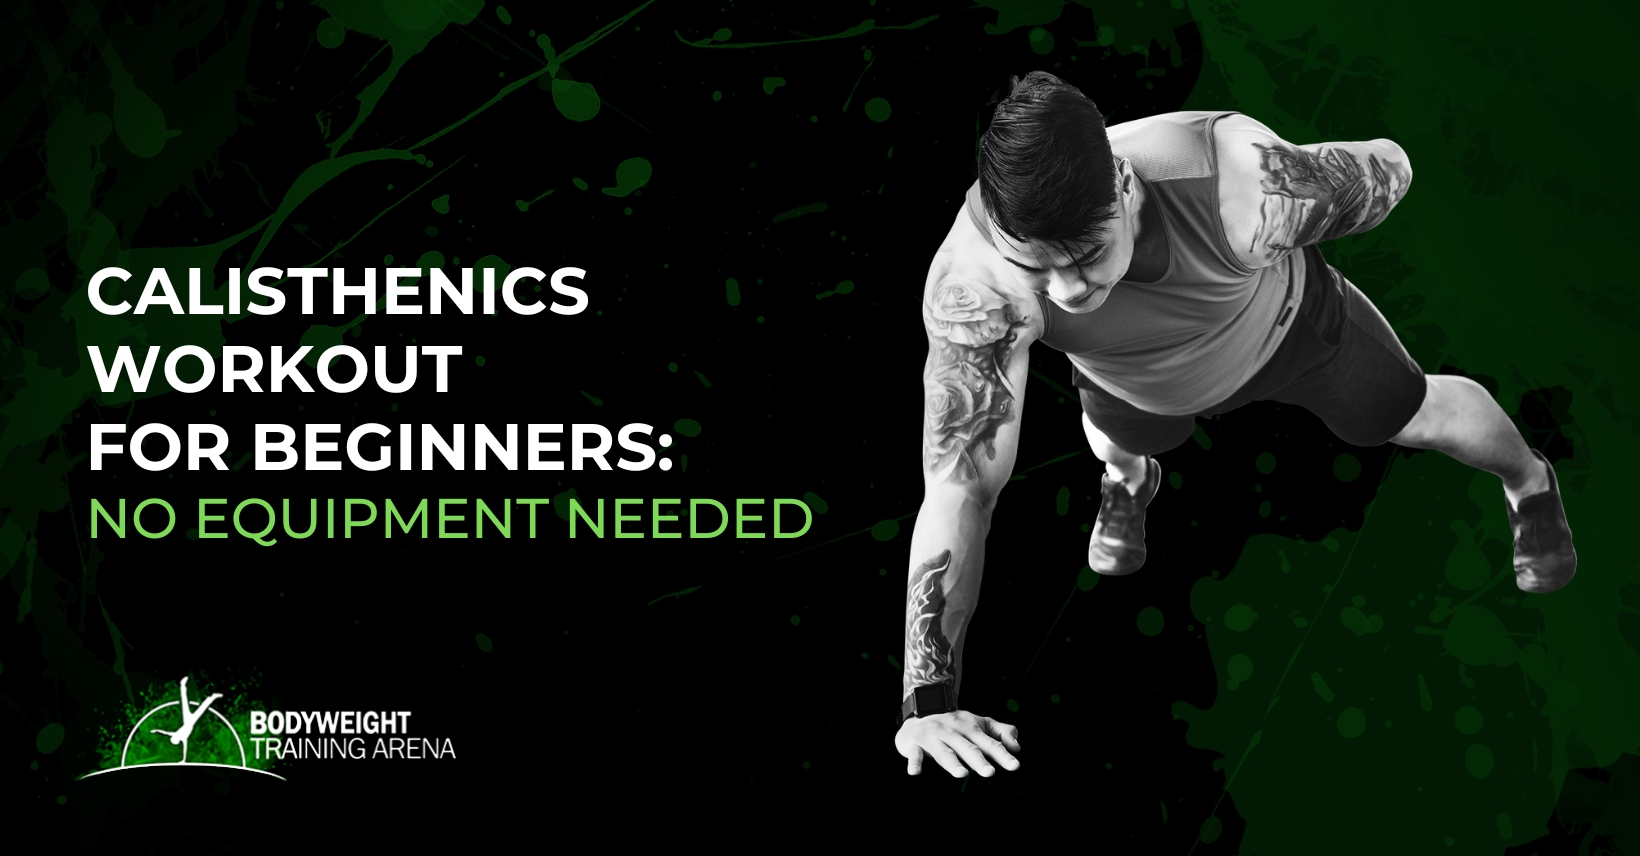 Calisthenics Workout for Beginners: No Equipment Needed